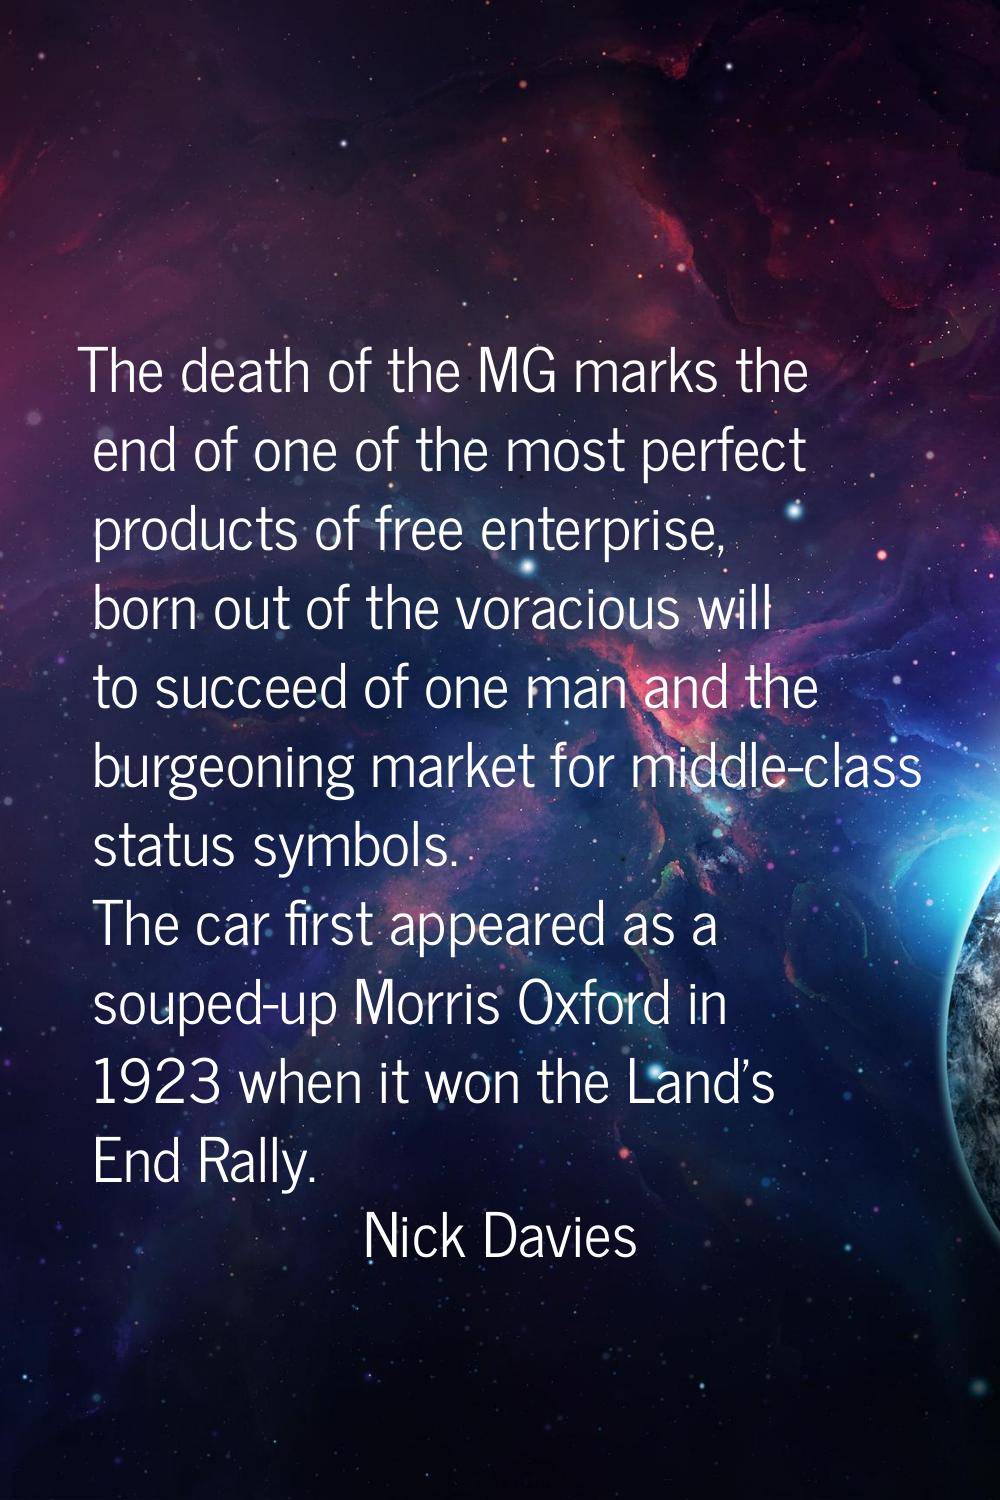 The death of the MG marks the end of one of the most perfect products of free enterprise, born out 